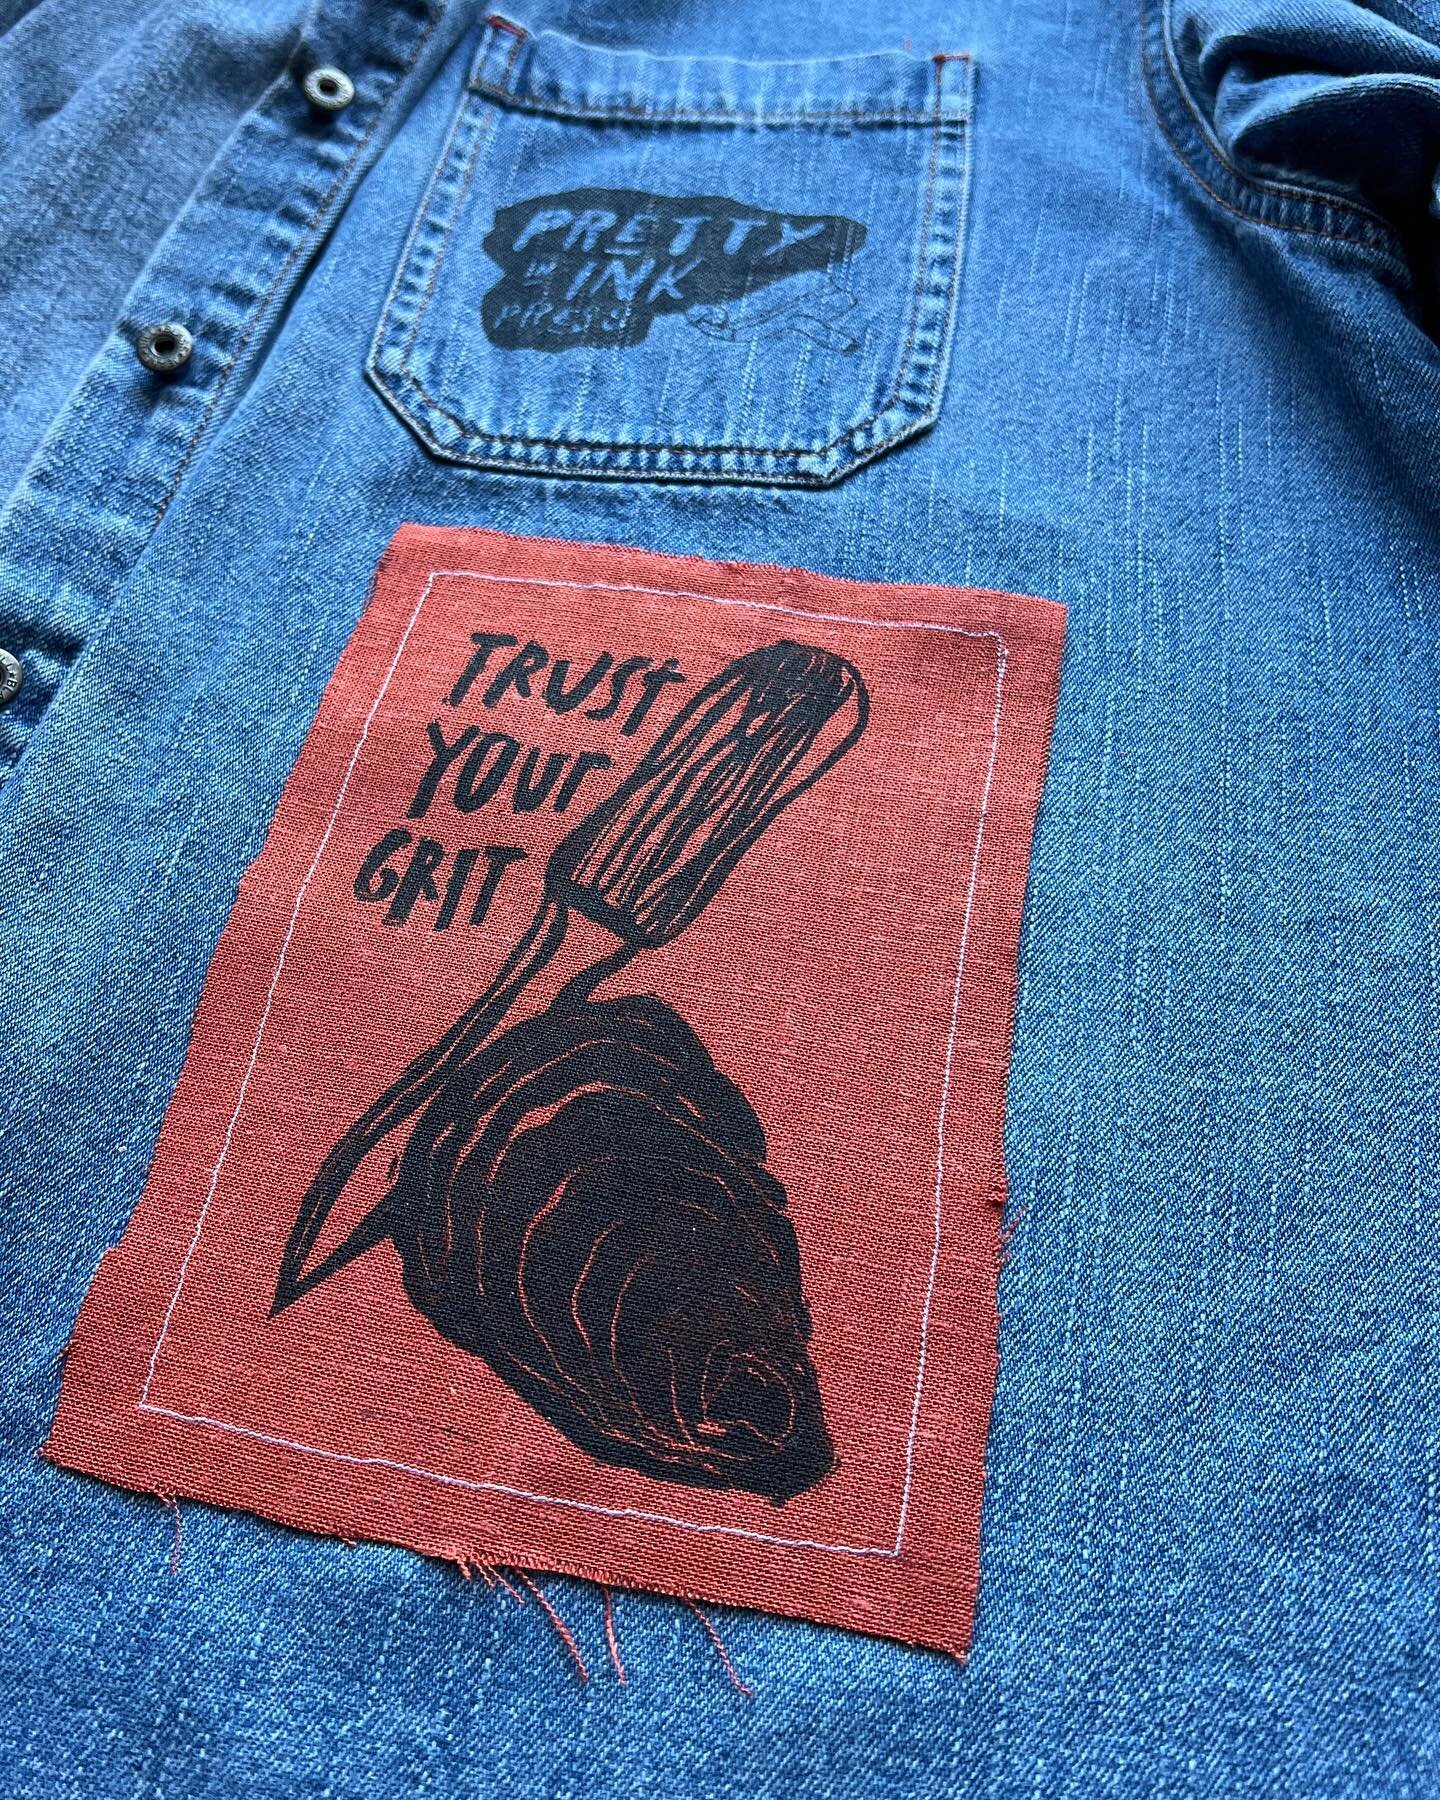 trust your grit 🦪

i love to try different mediums, avenues or just different ways of thinking and using my art. very proud of my block print patch for my patrons this month. i&rsquo;m in love. i&rsquo;m inspired by my own work. i know it&rsquo;s re